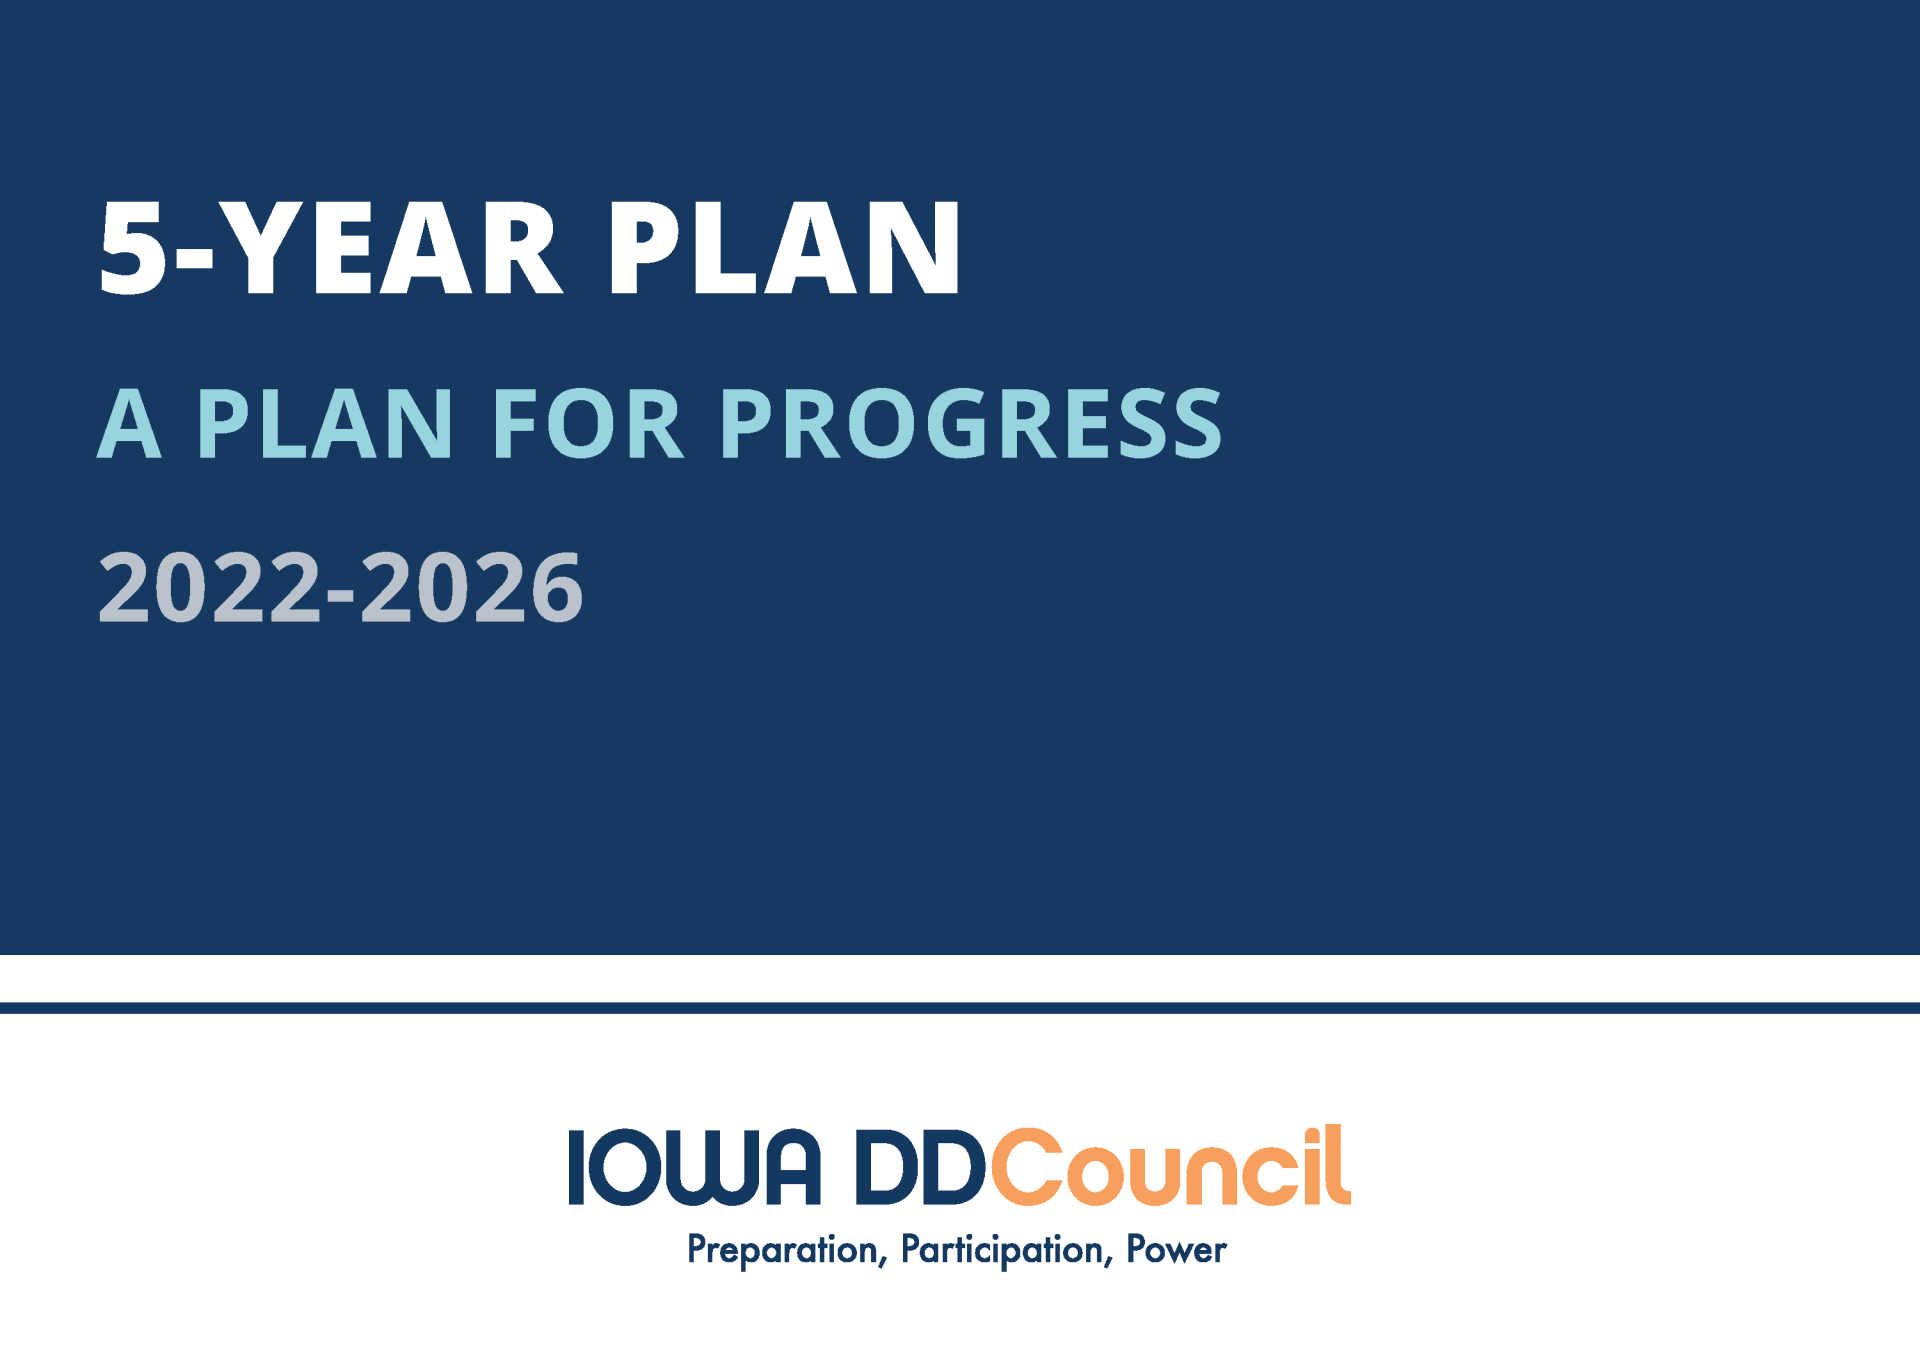 5-Year DD Council State Plan